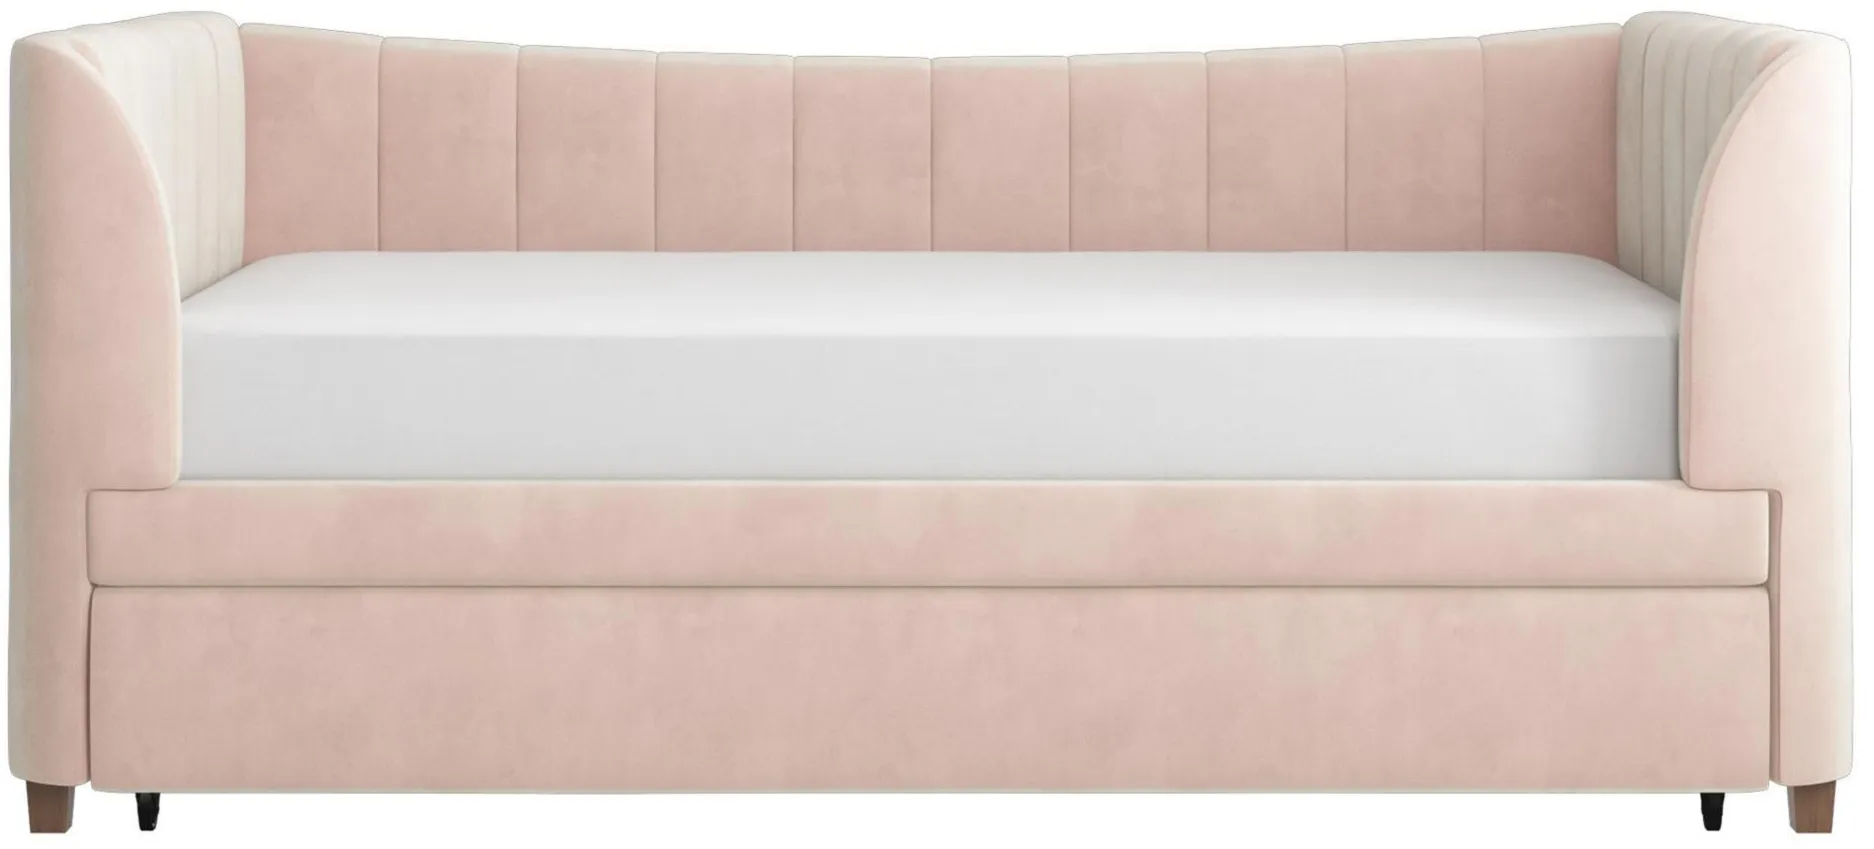 Little Seeds Valentina Upholstered Daybed with Trundle in Pink by DOREL HOME FURNISHINGS